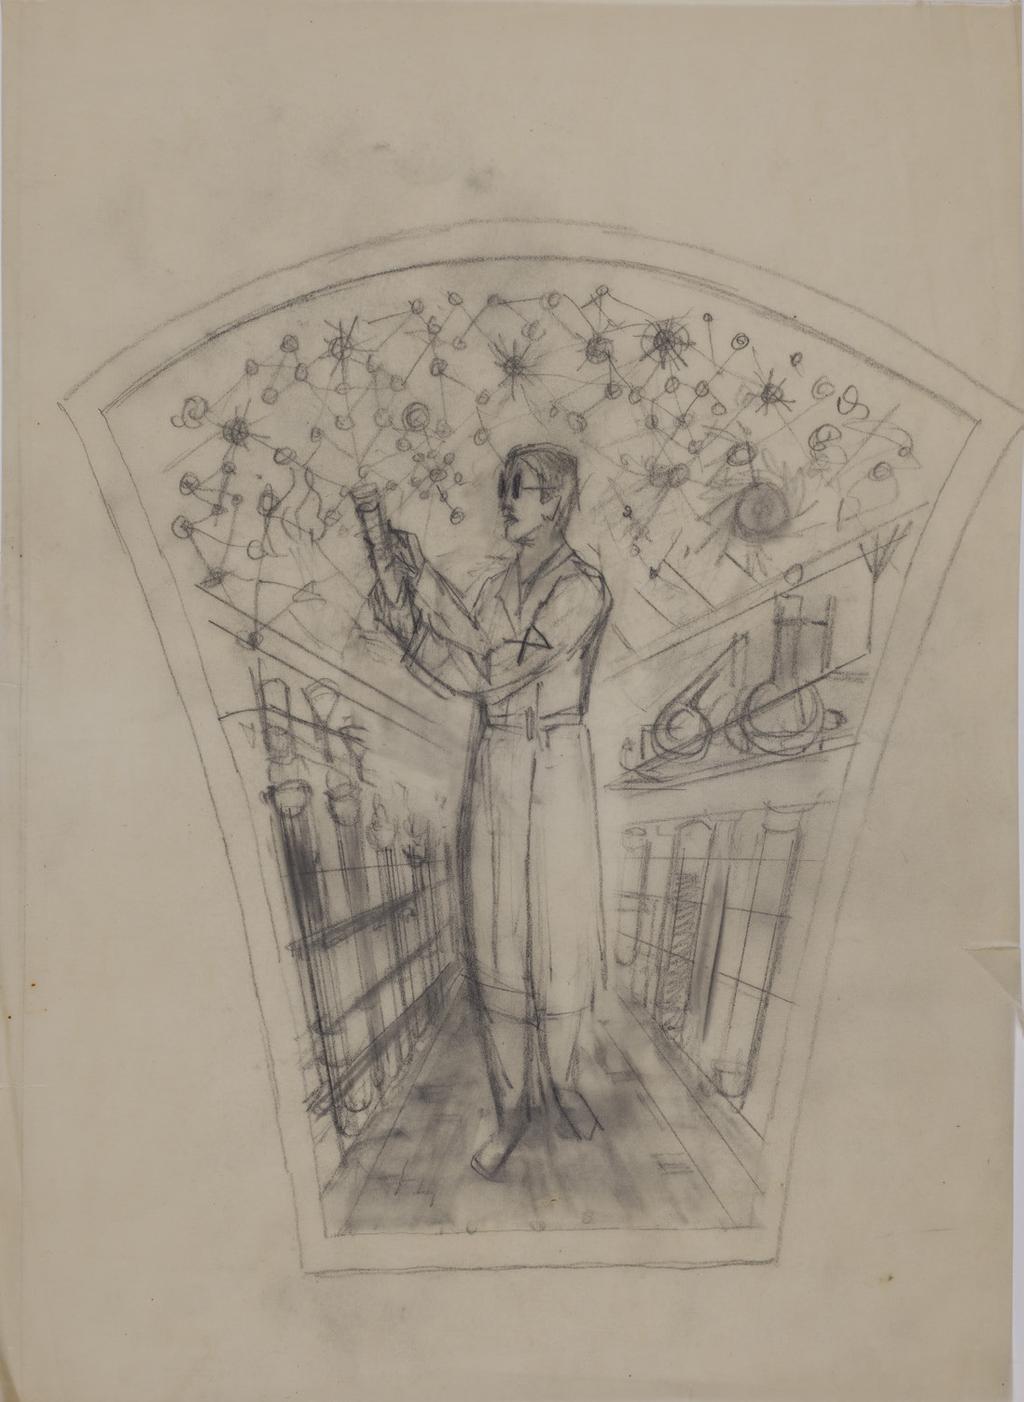 acqui s i ti ons / the s w e d i sh g l ass p o e t e dwa r d h a l d s p r i vat e a rc h i v e Fig. 3 Edward Hald (1883 1980), Draft for a Lampshade of Glass, 1933. Pencil on paper, 32 x 24 cm.